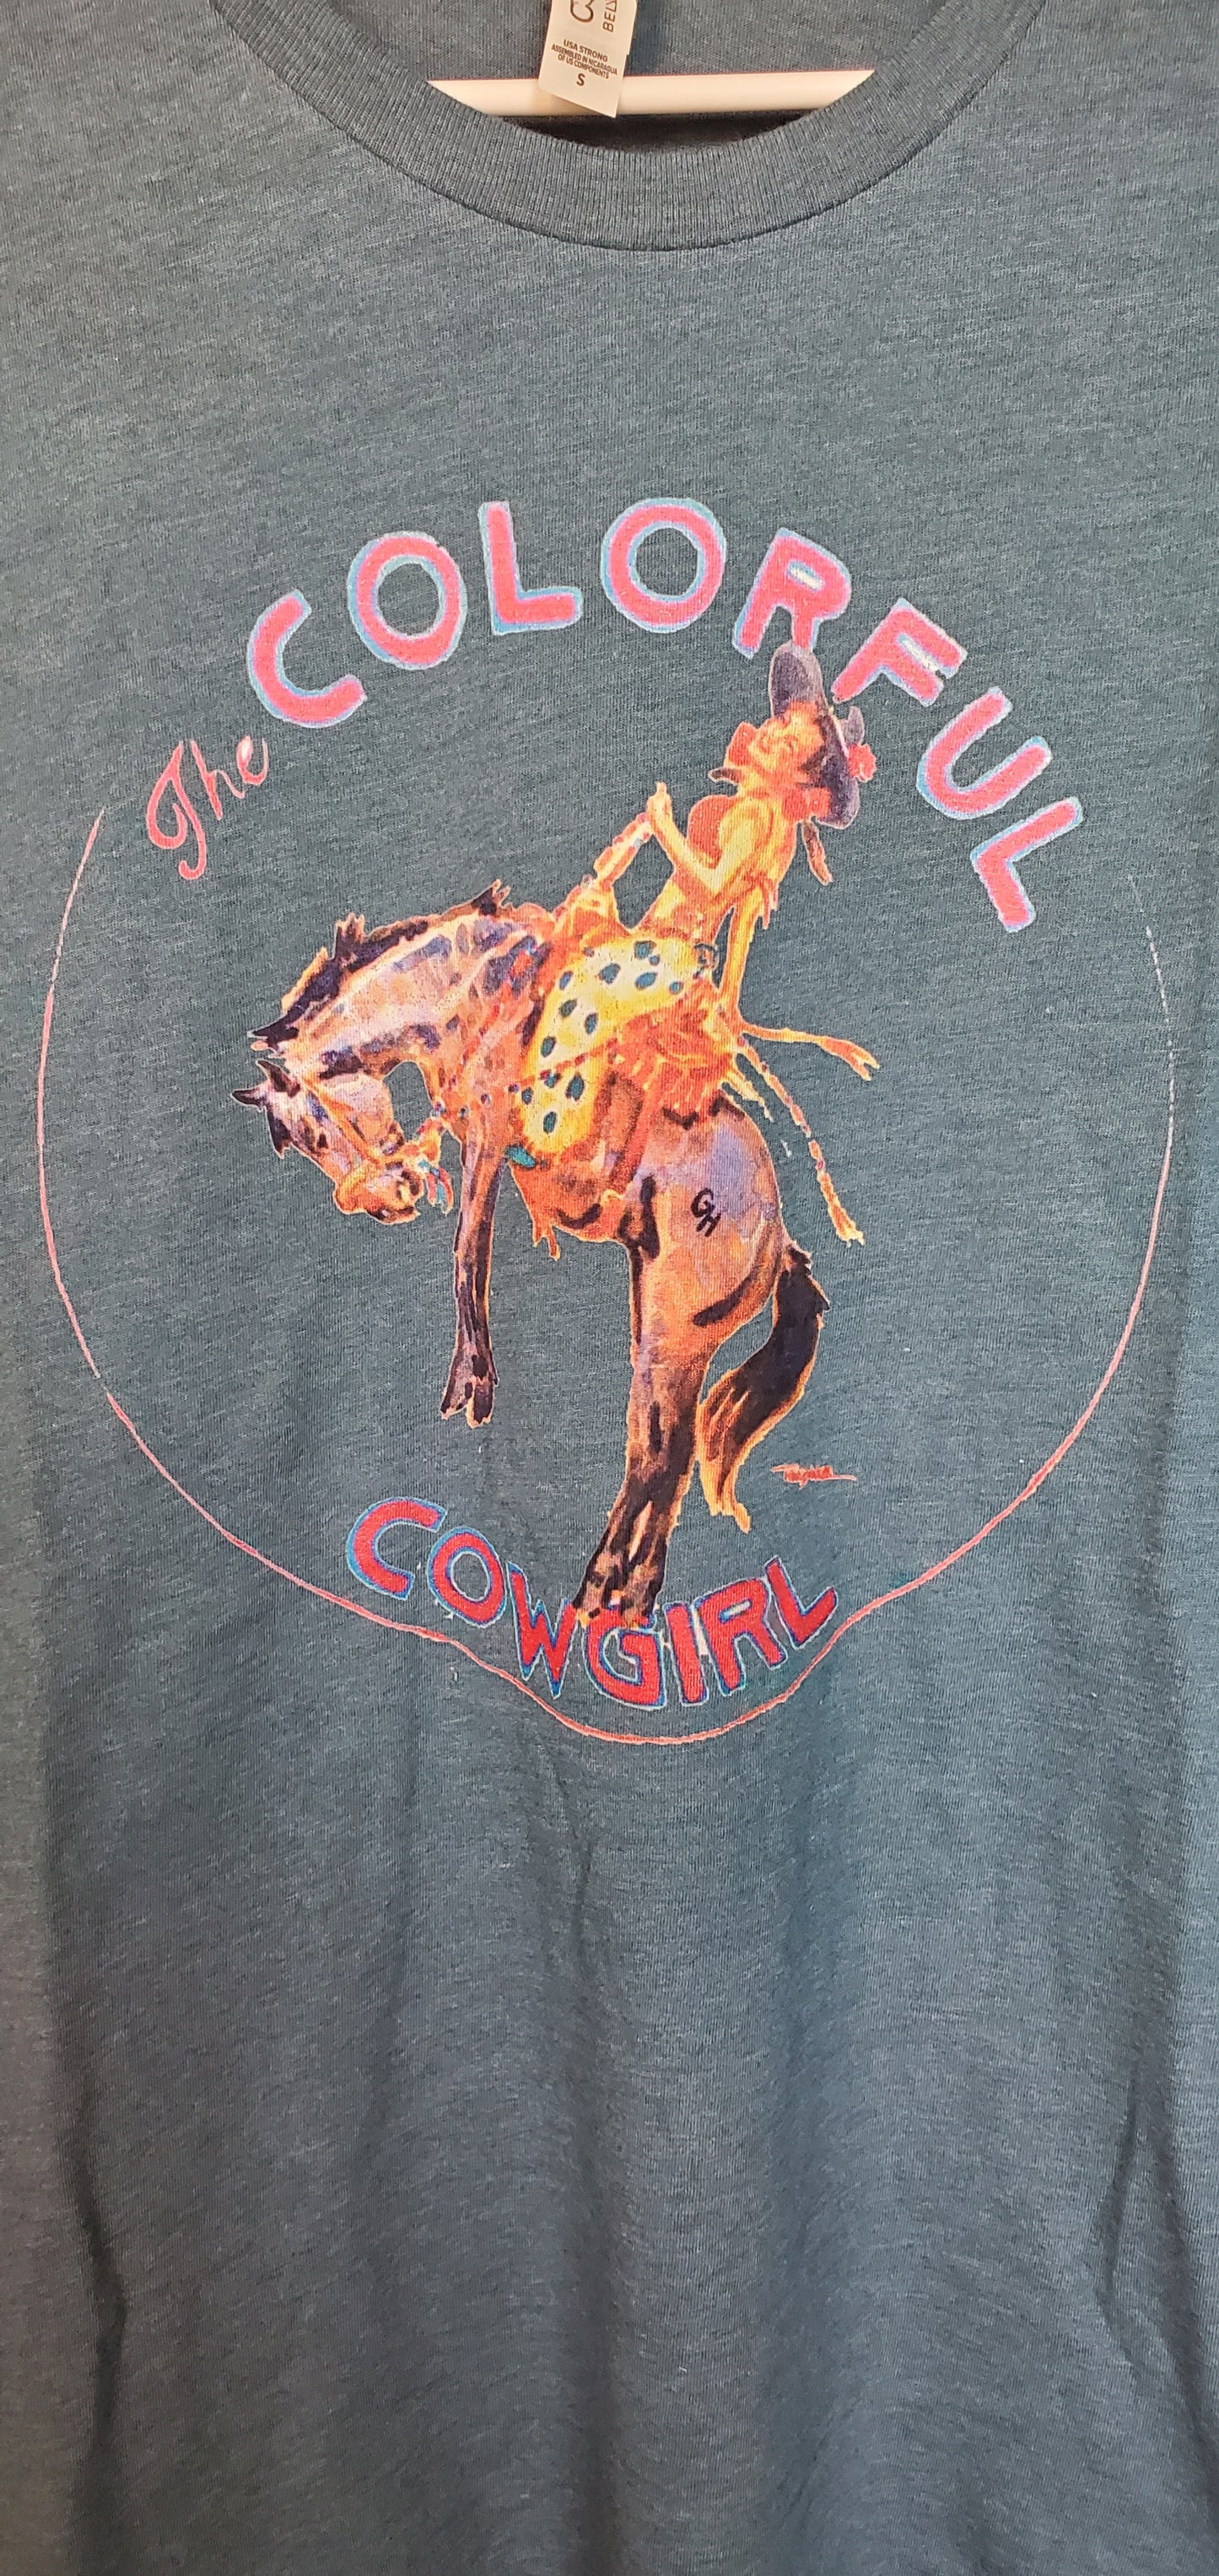 The Colorful Cowgirl Logo Tee